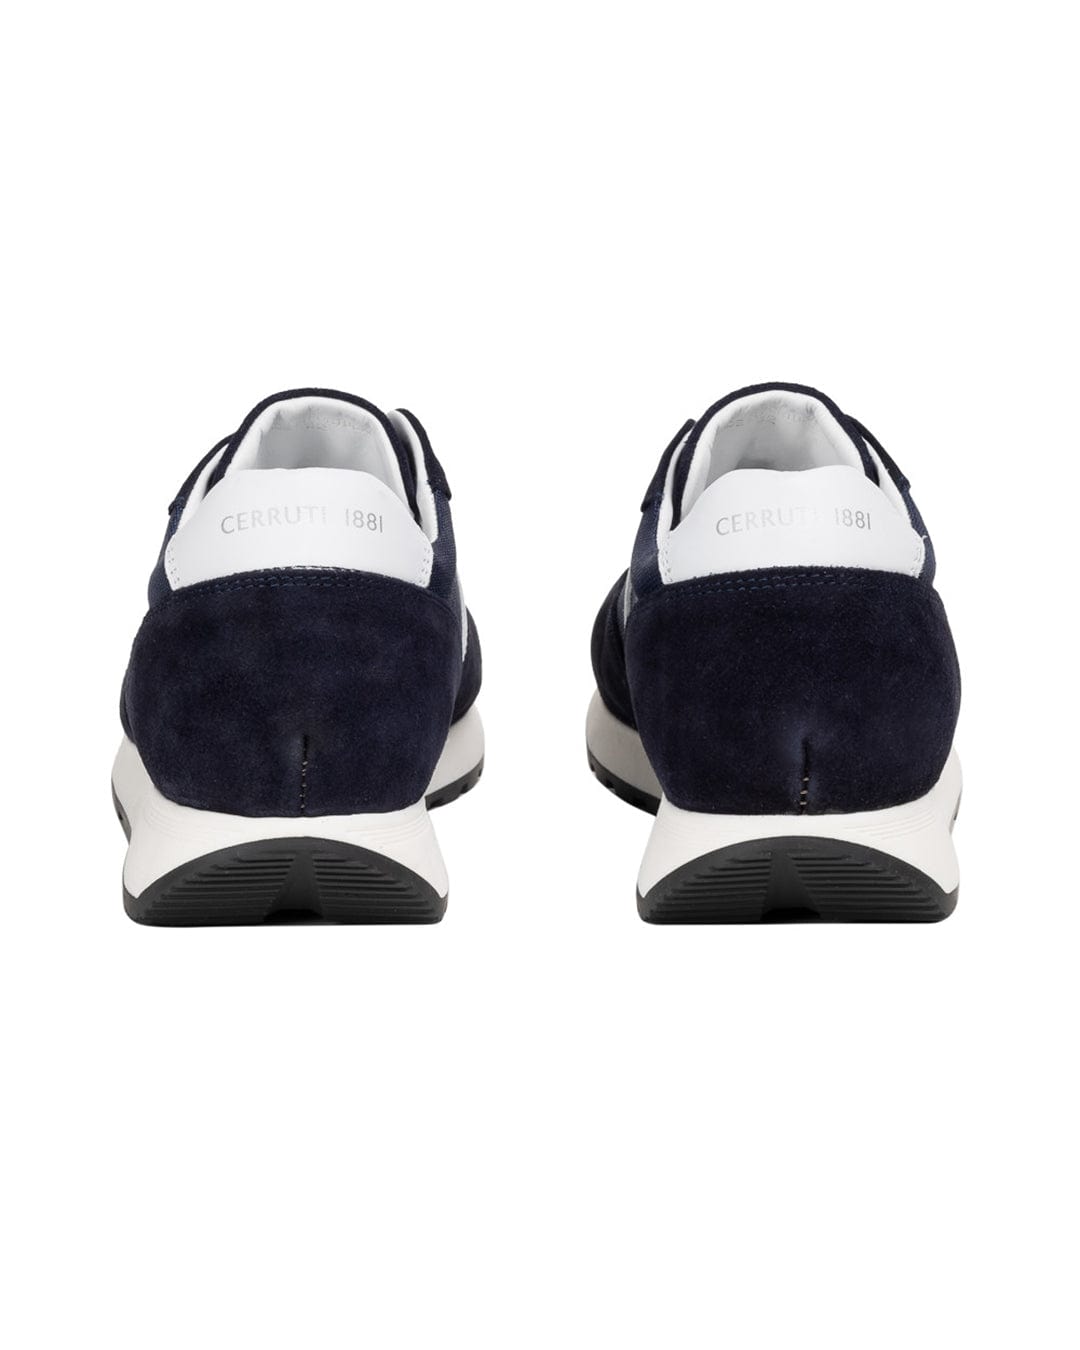 Cerruti Shoes Cerruti I88I Navy And White Leather Sneakers